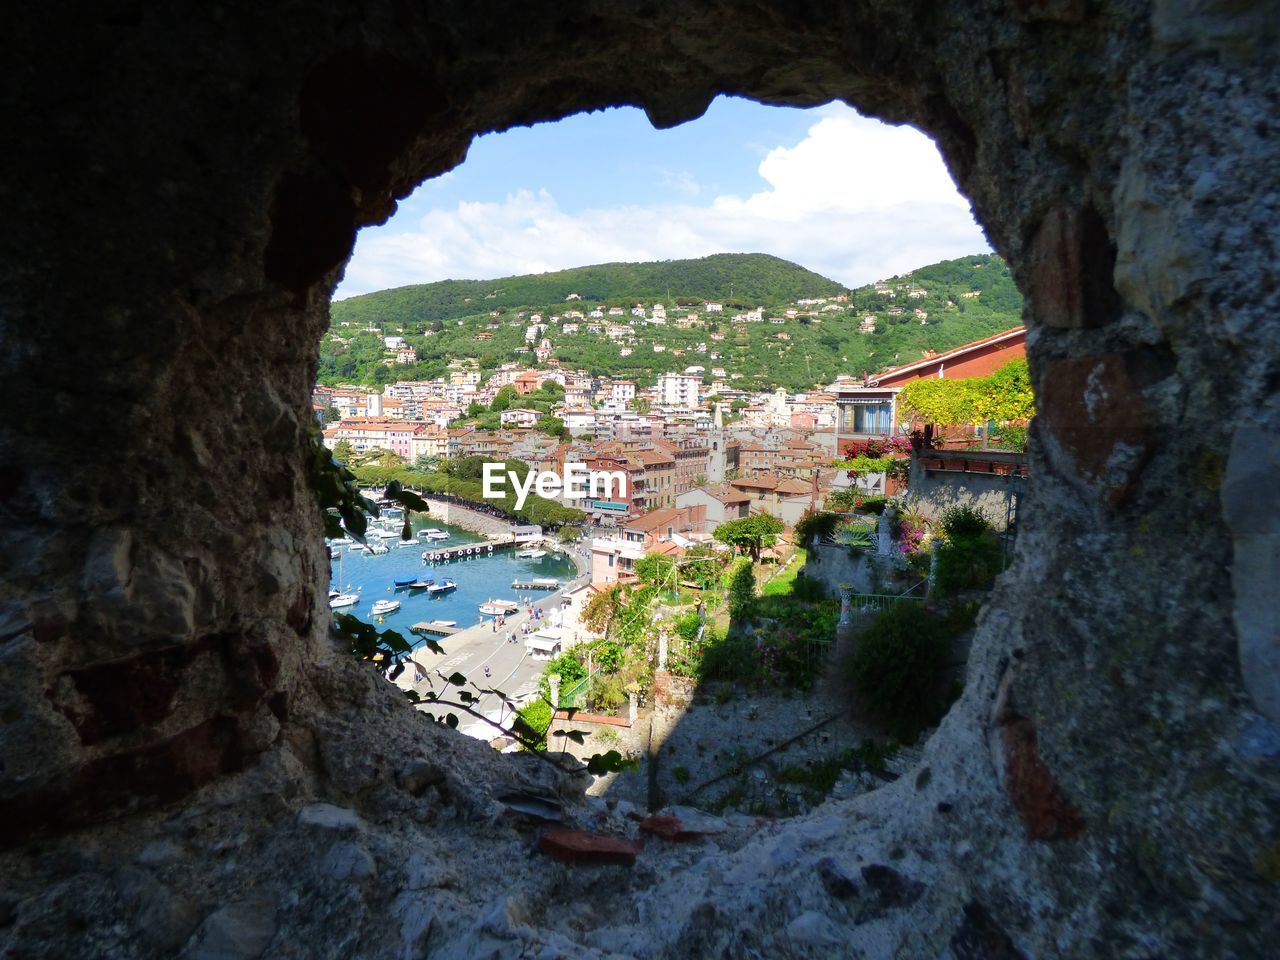 HIGH ANGLE VIEW OF TOWNSCAPE AND MOUNTAINS SEEN THROUGH ARCH